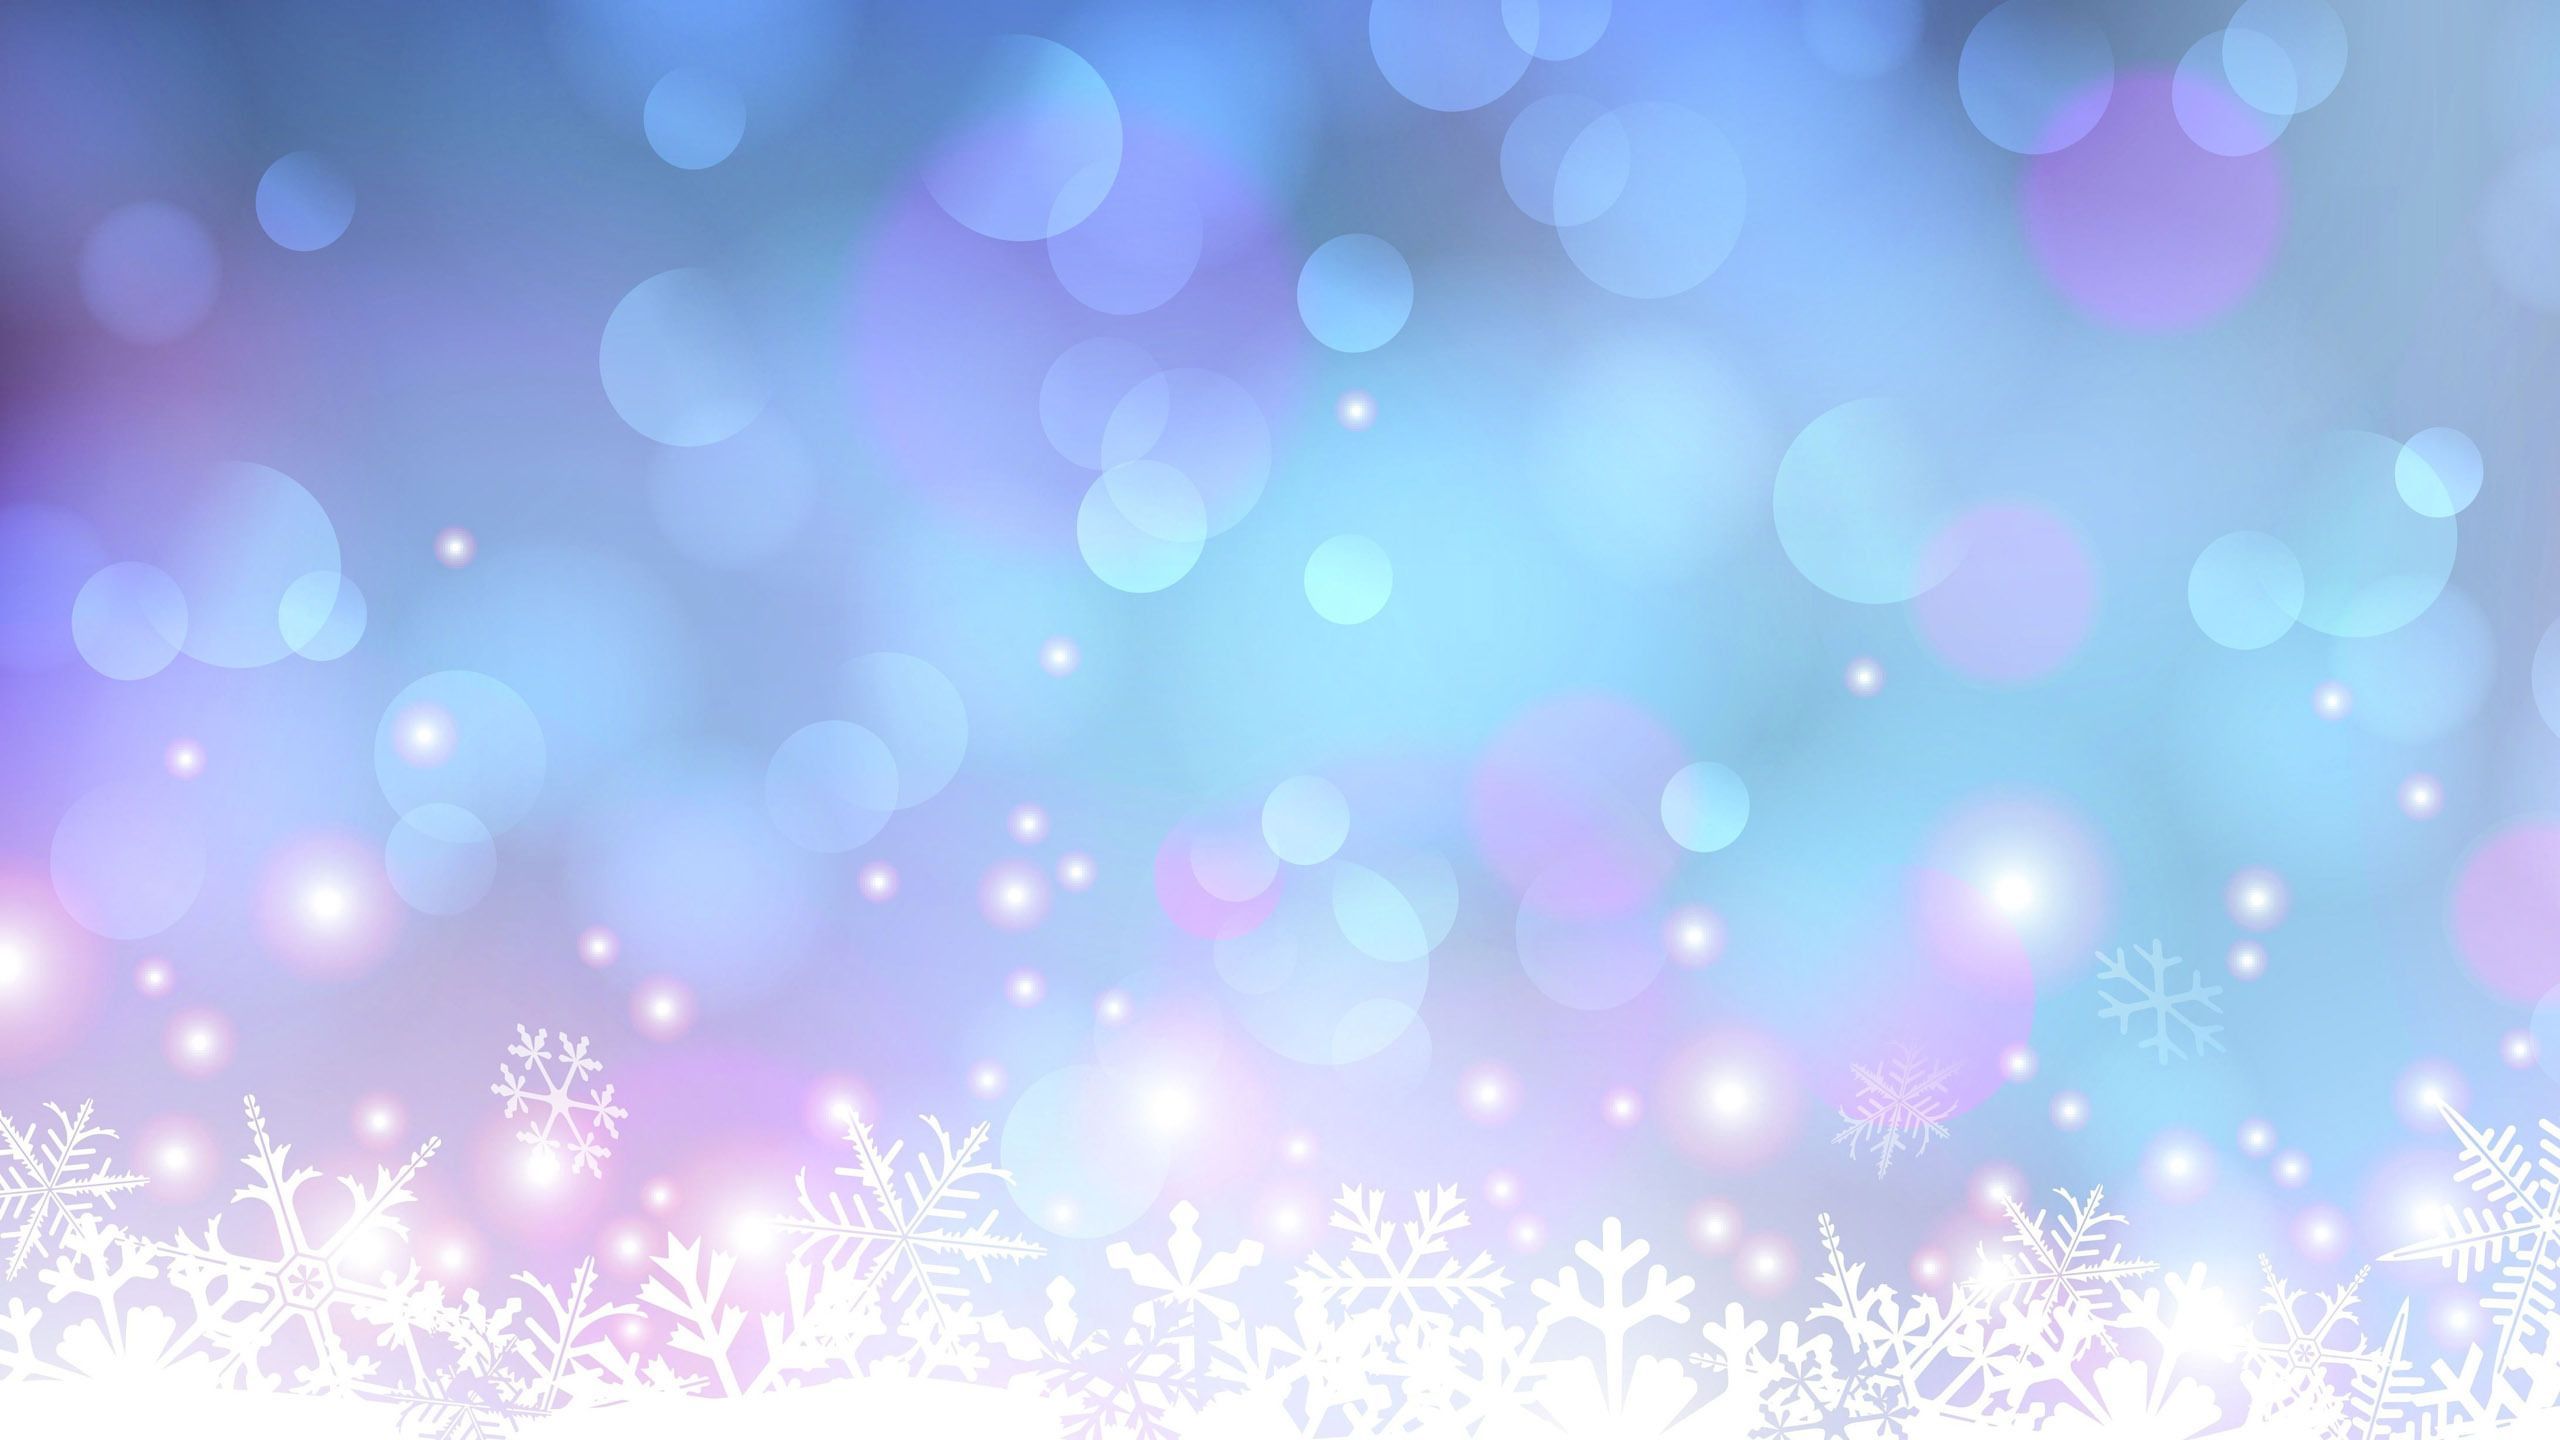 A blue and purple background with snowflakes - Snowflake